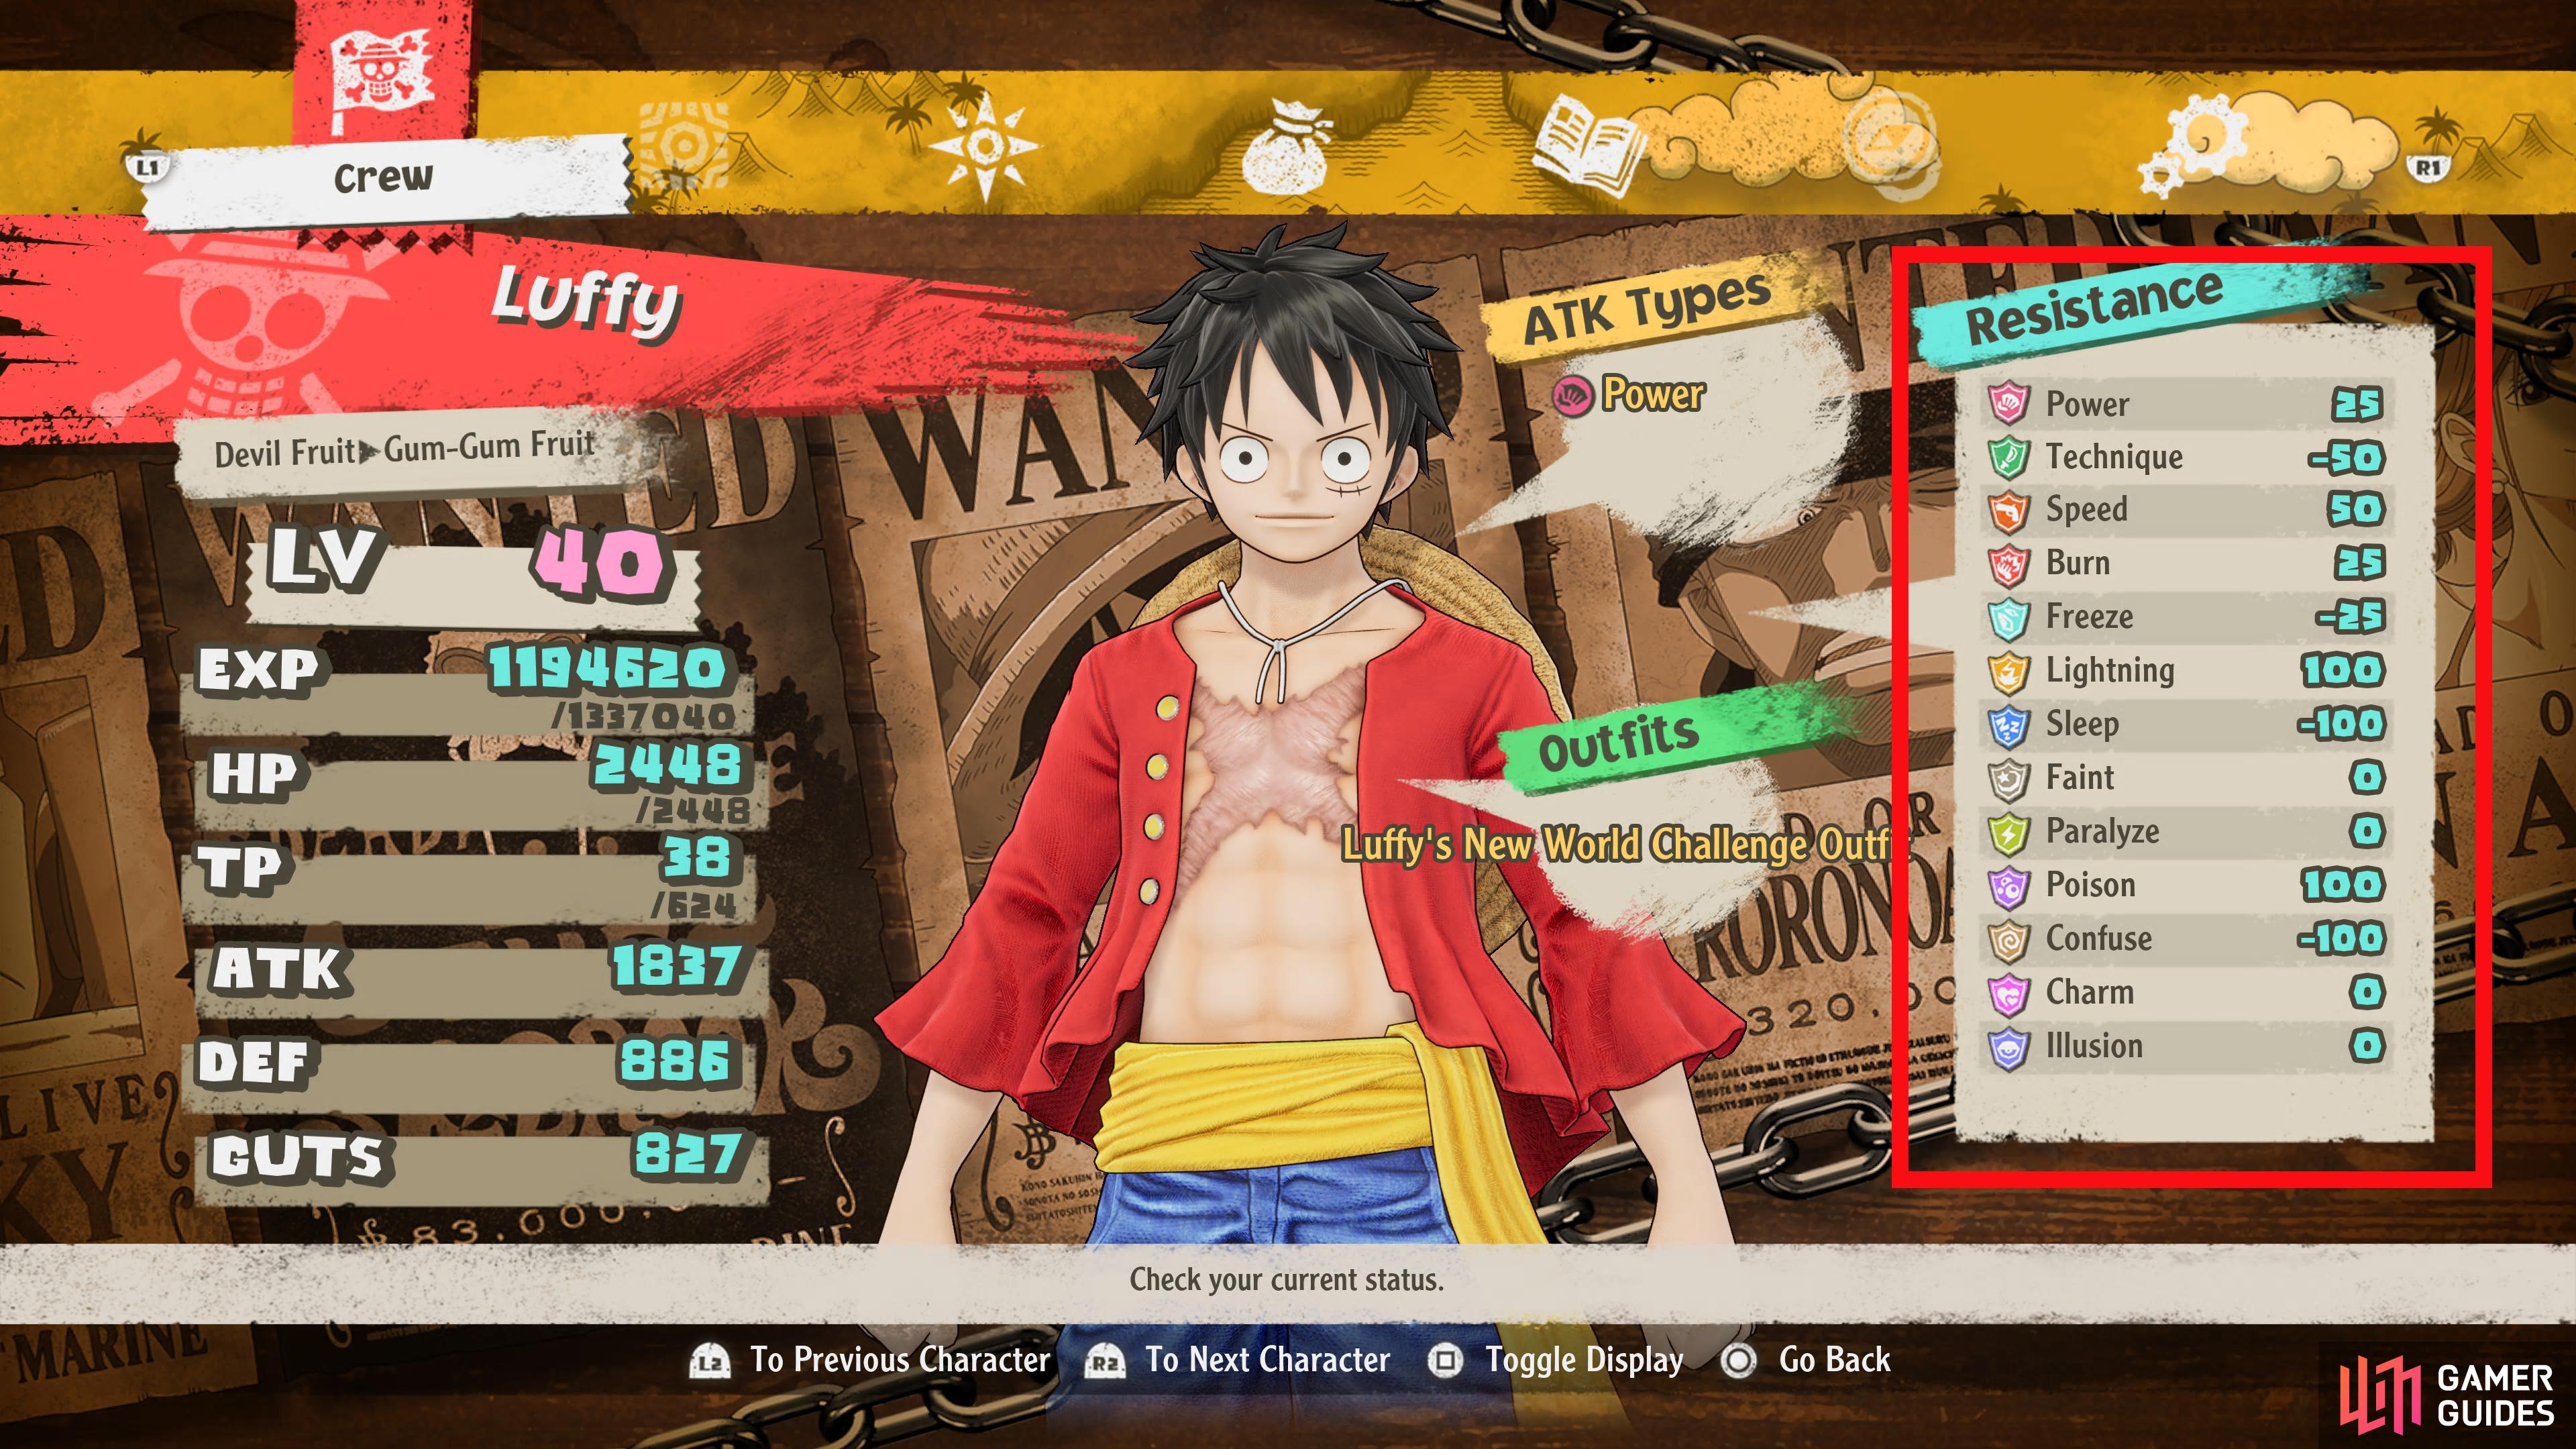 You can find your resistances to specific status effects in the Crew screen.